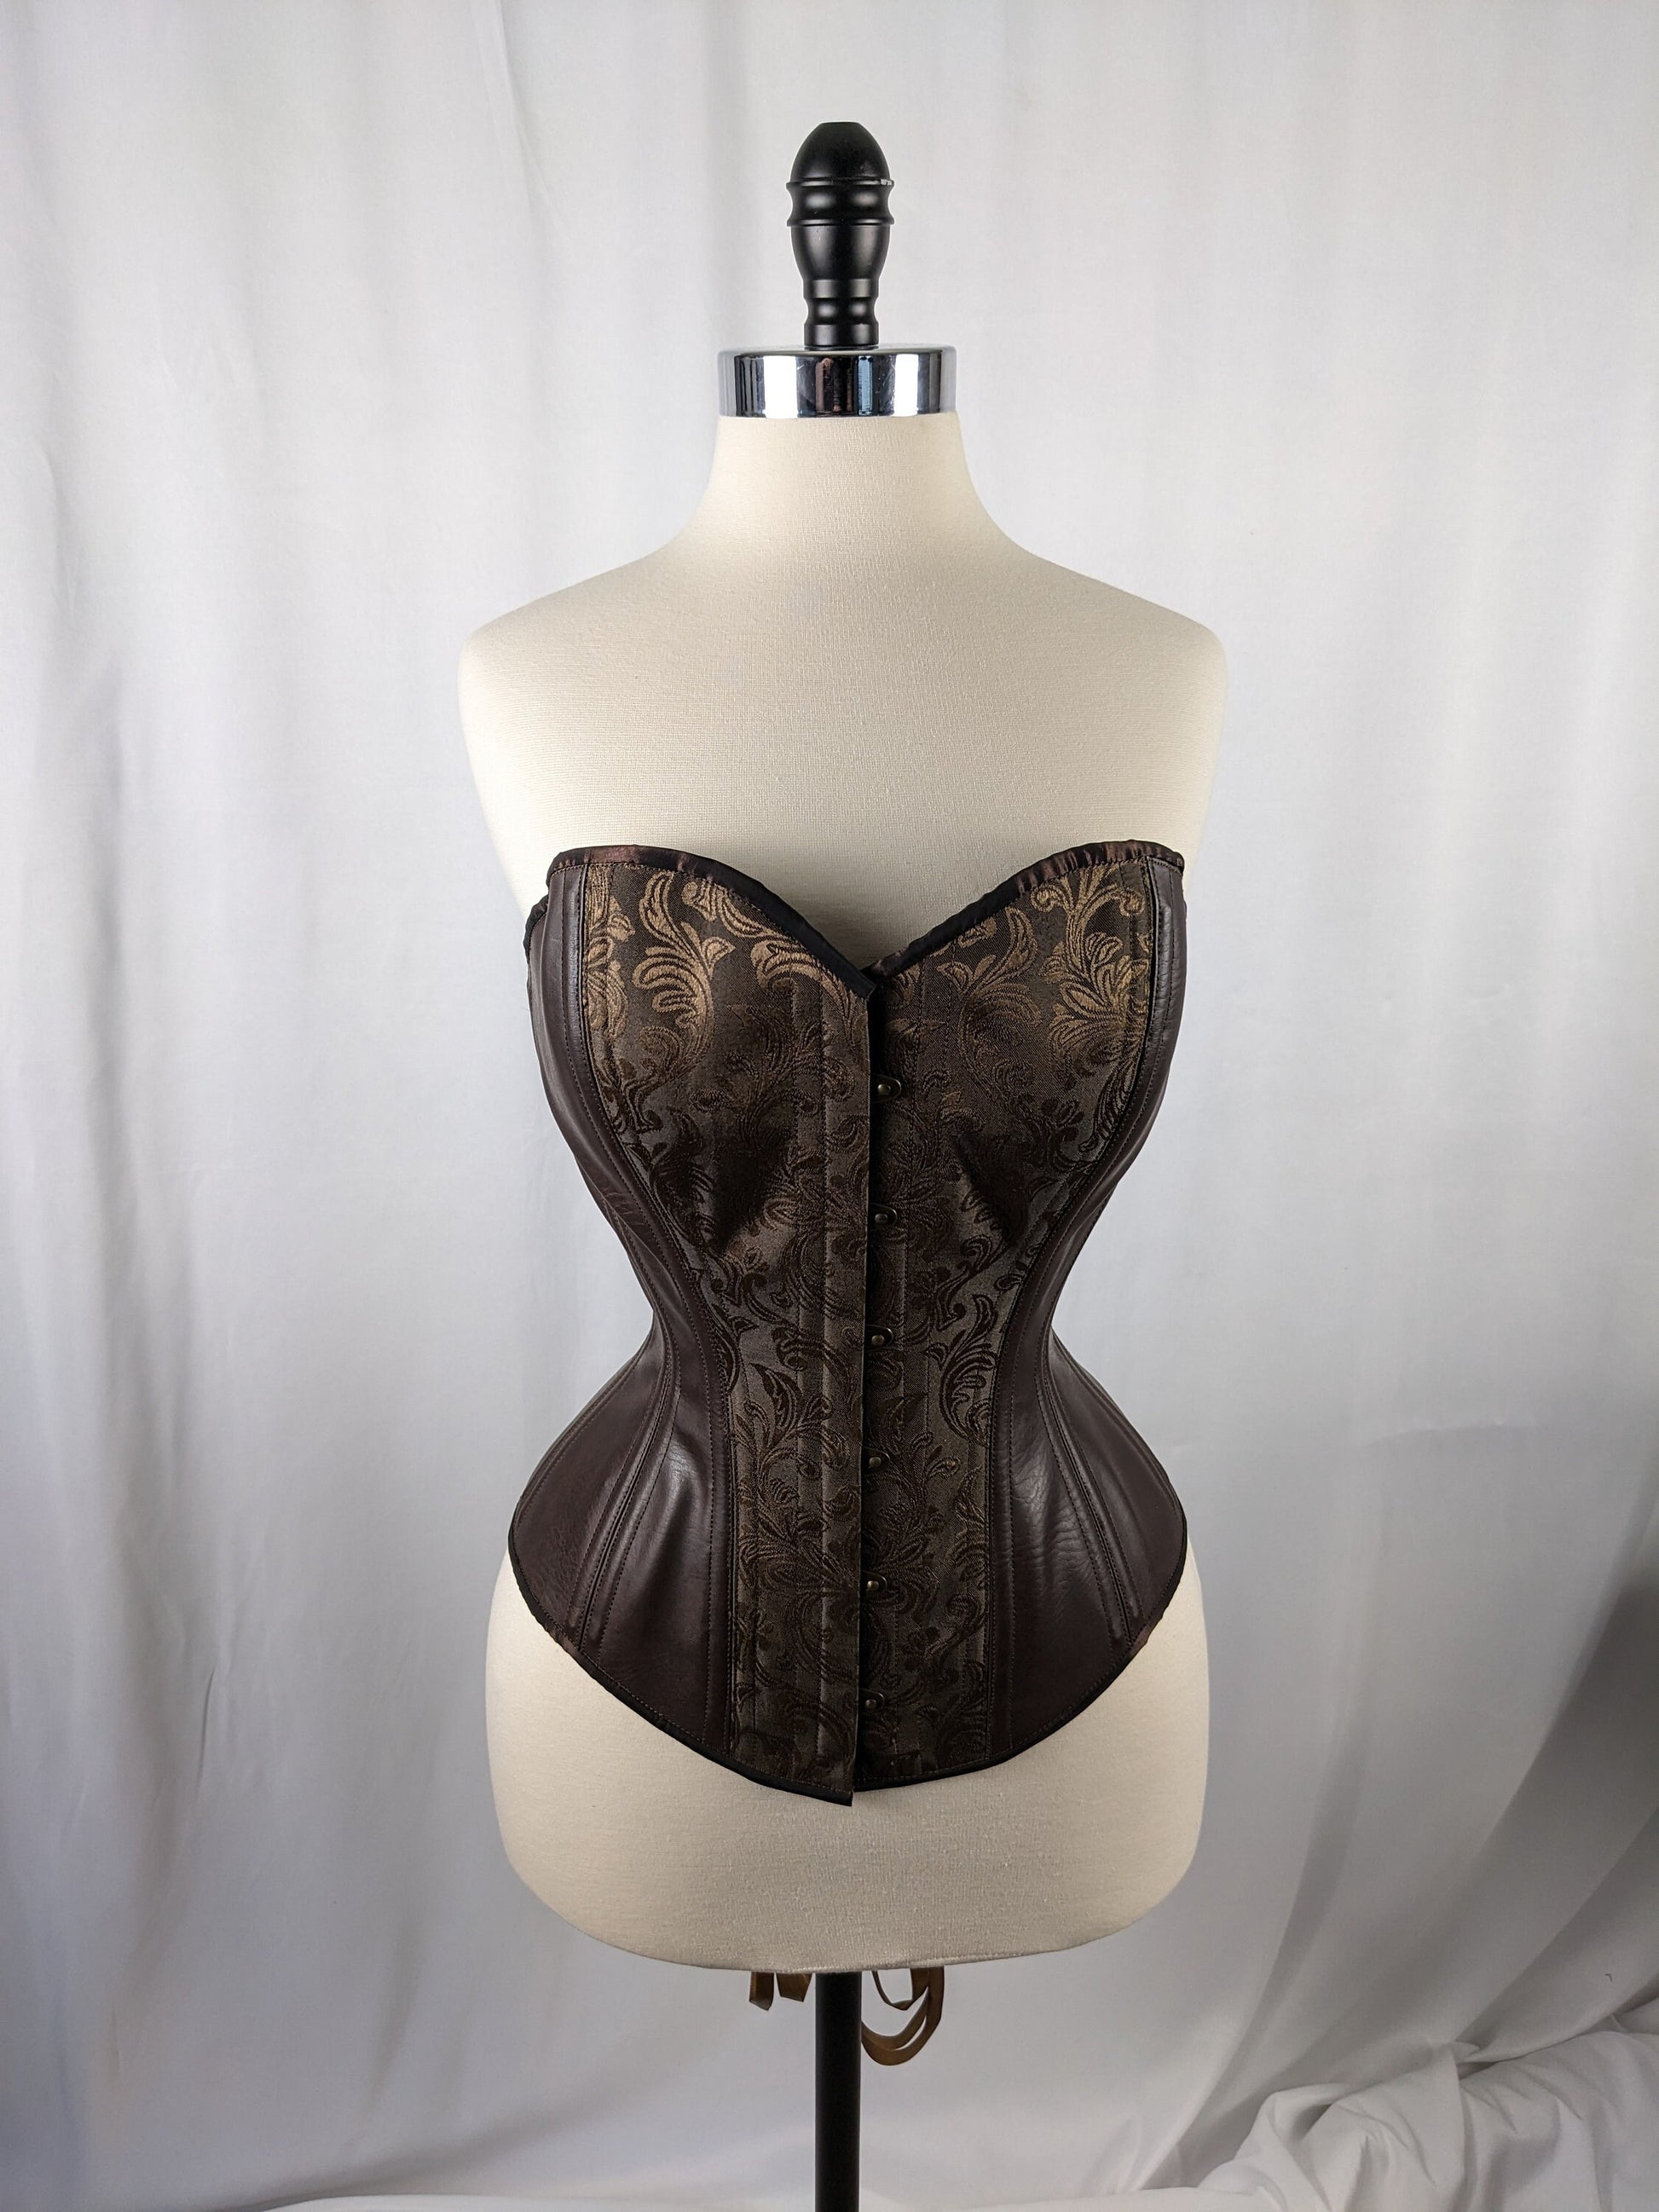 Buy Custom Made Corsets and Ivory Corset at low price from here